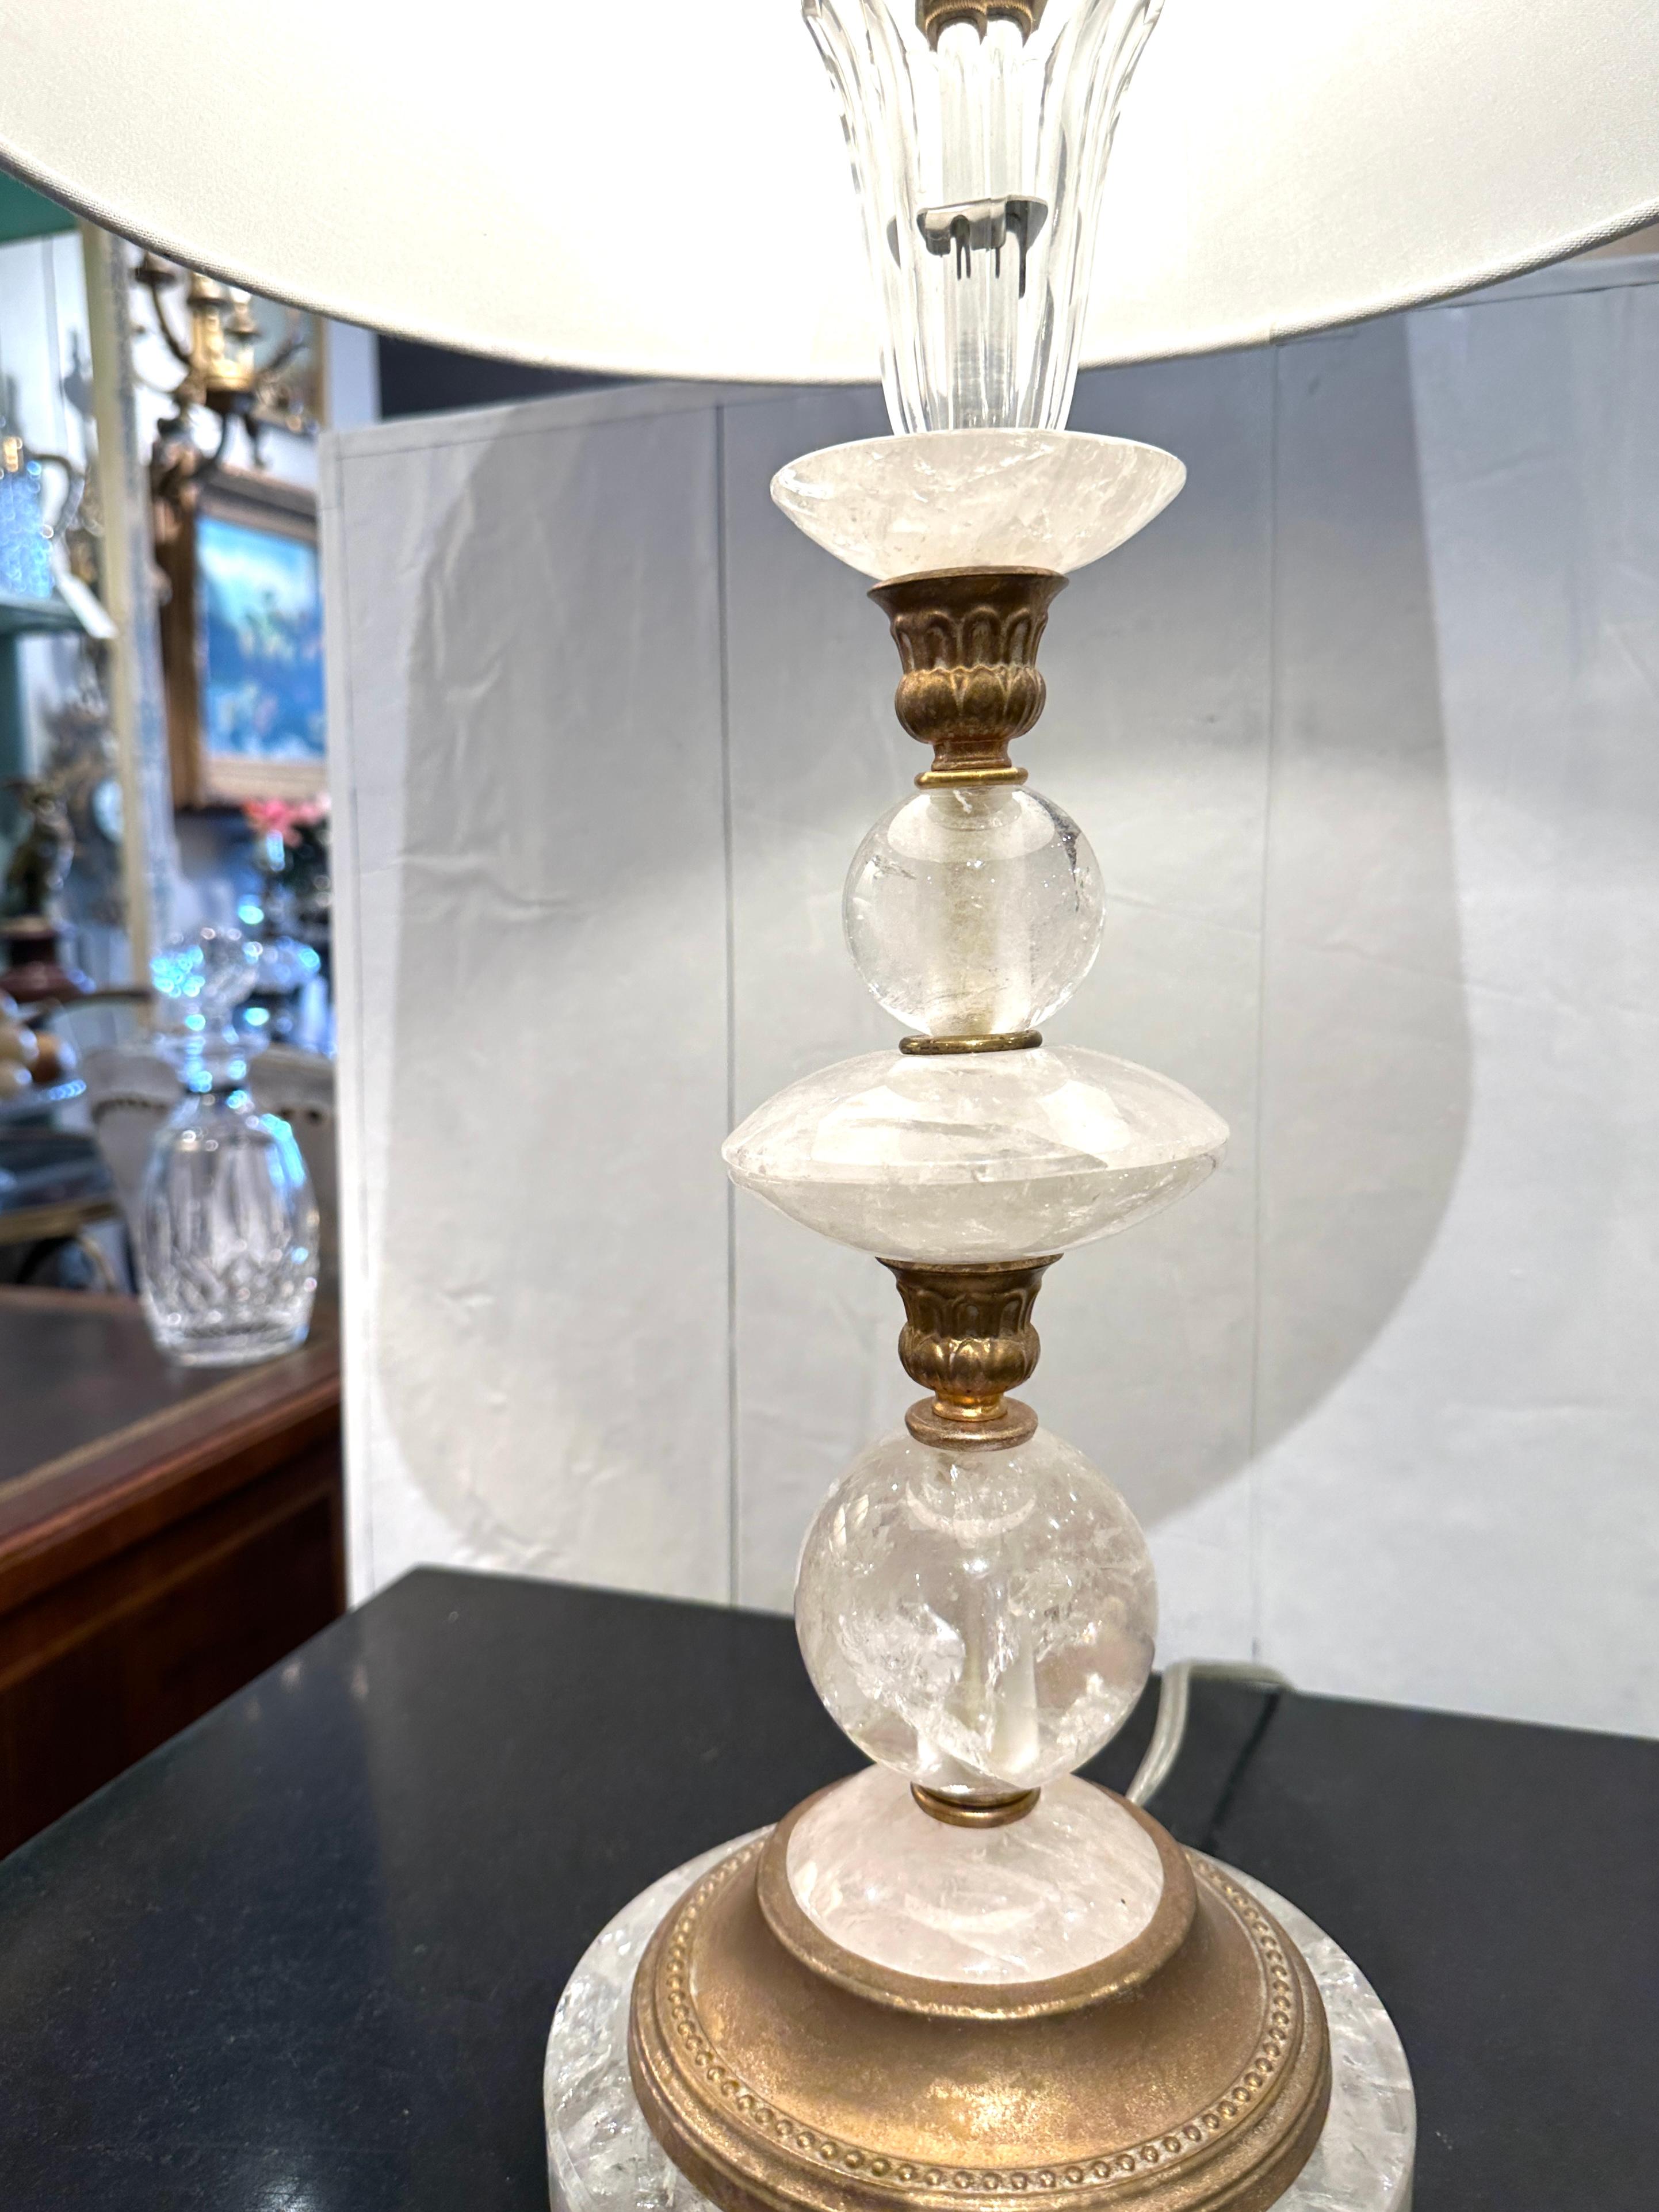 Vintage Rock Crystal Table Lamp In Good Condition For Sale In Summerland, CA